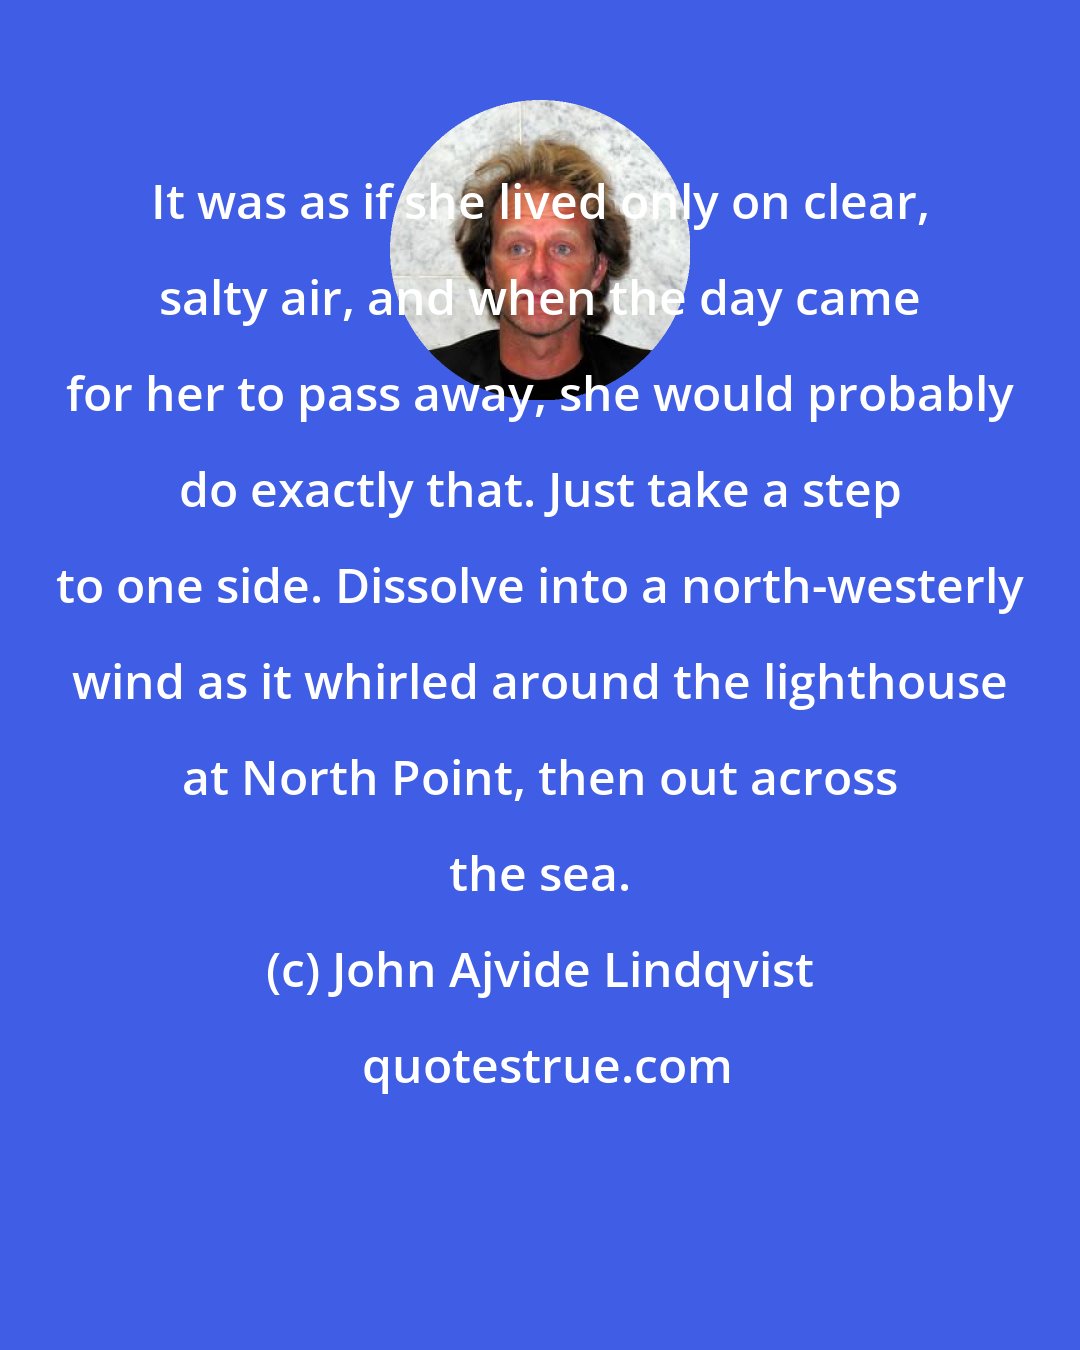 John Ajvide Lindqvist: It was as if she lived only on clear, salty air, and when the day came for her to pass away, she would probably do exactly that. Just take a step to one side. Dissolve into a north-westerly wind as it whirled around the lighthouse at North Point, then out across the sea.